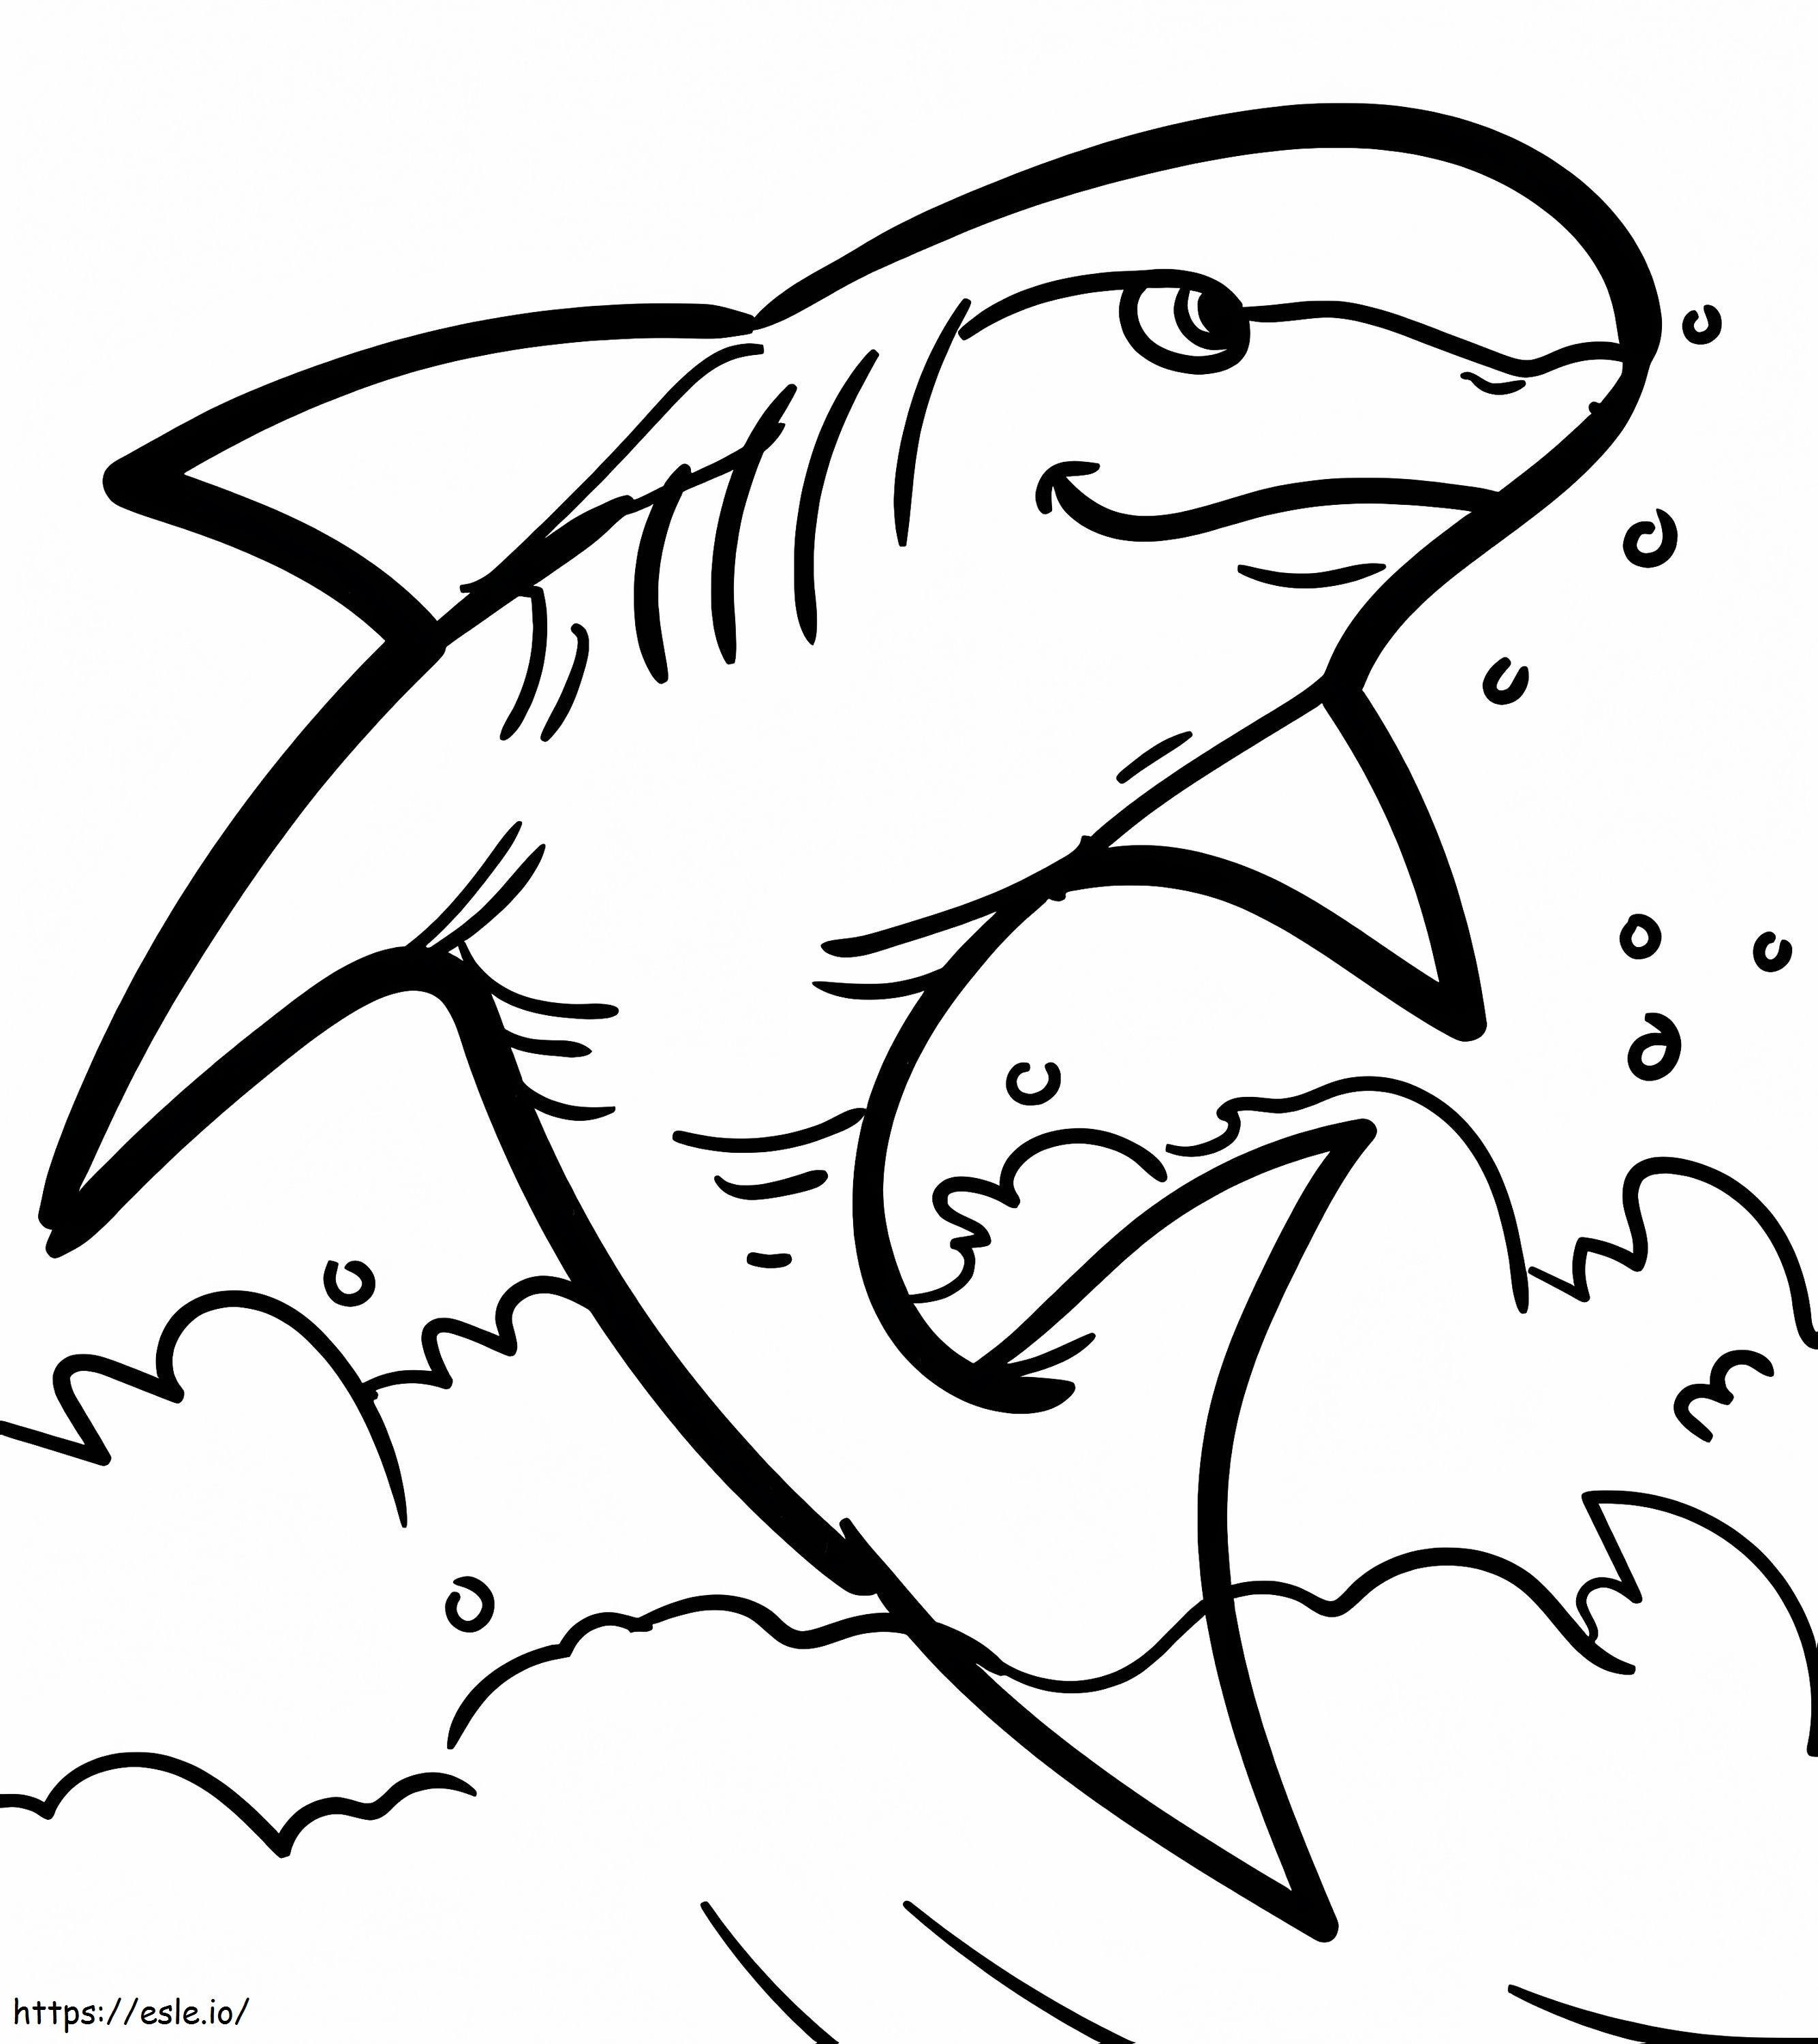 Cool Shark coloring page